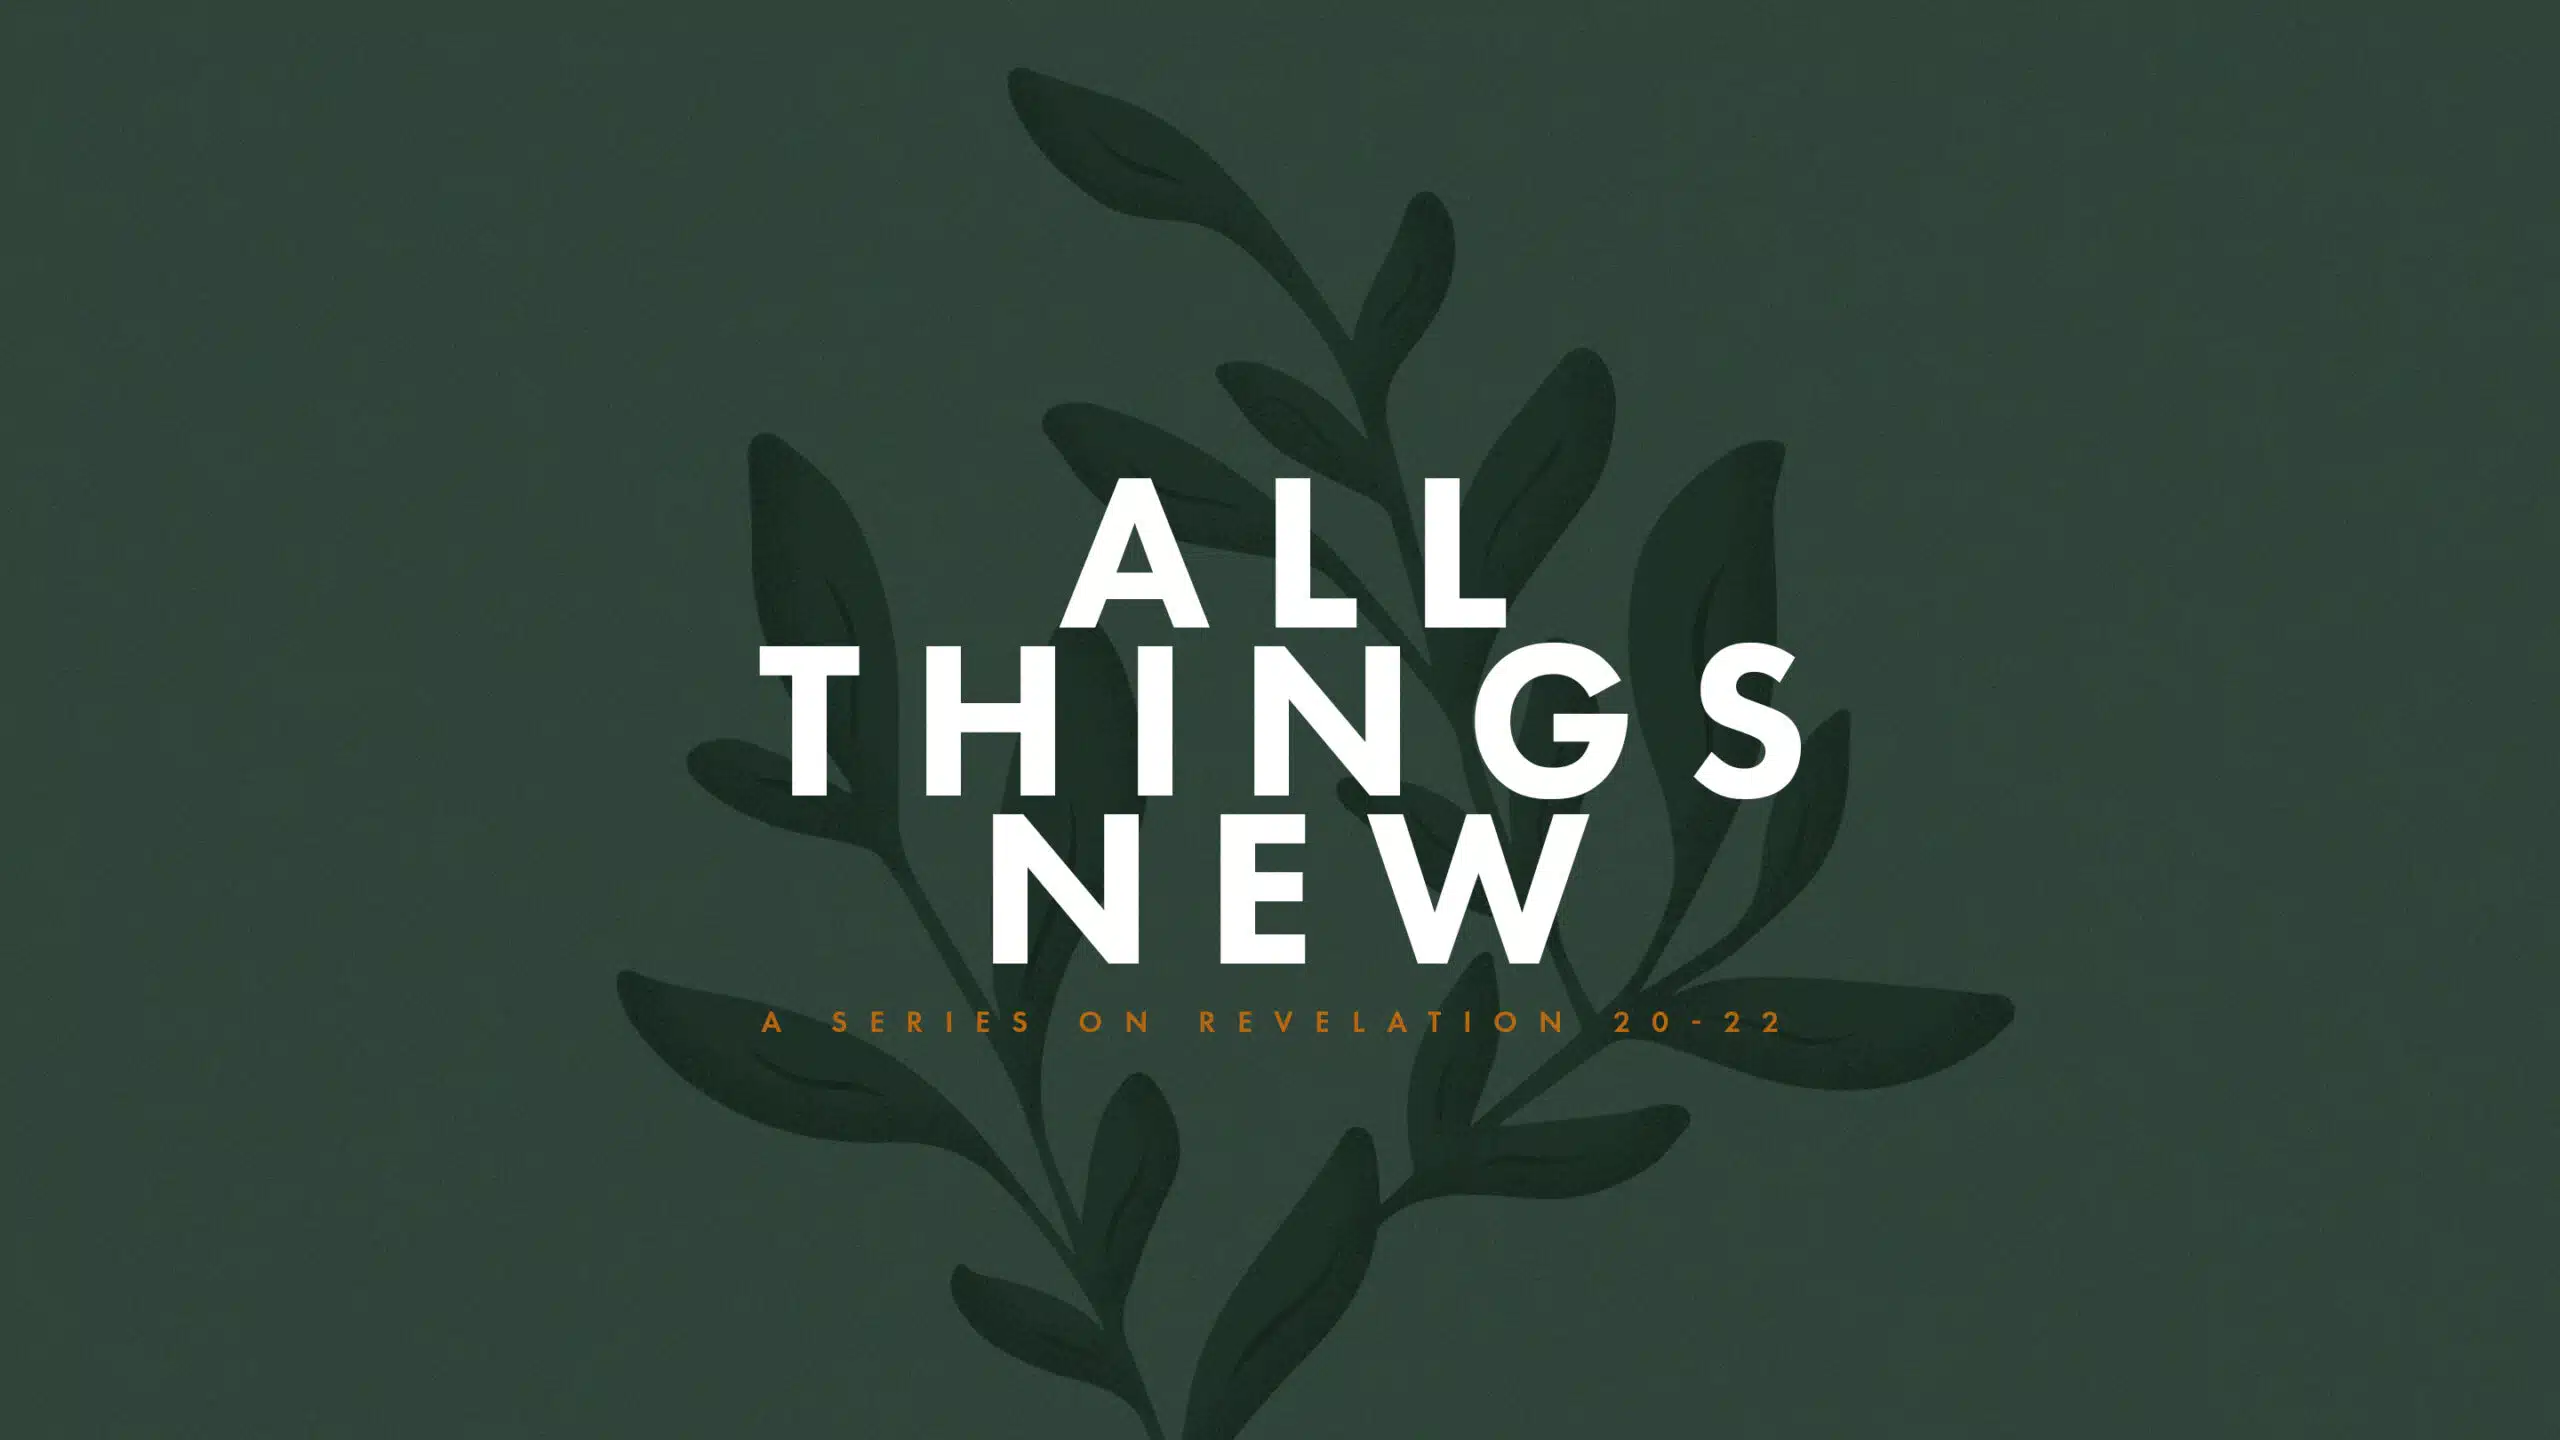 Featured image for “All Things New”